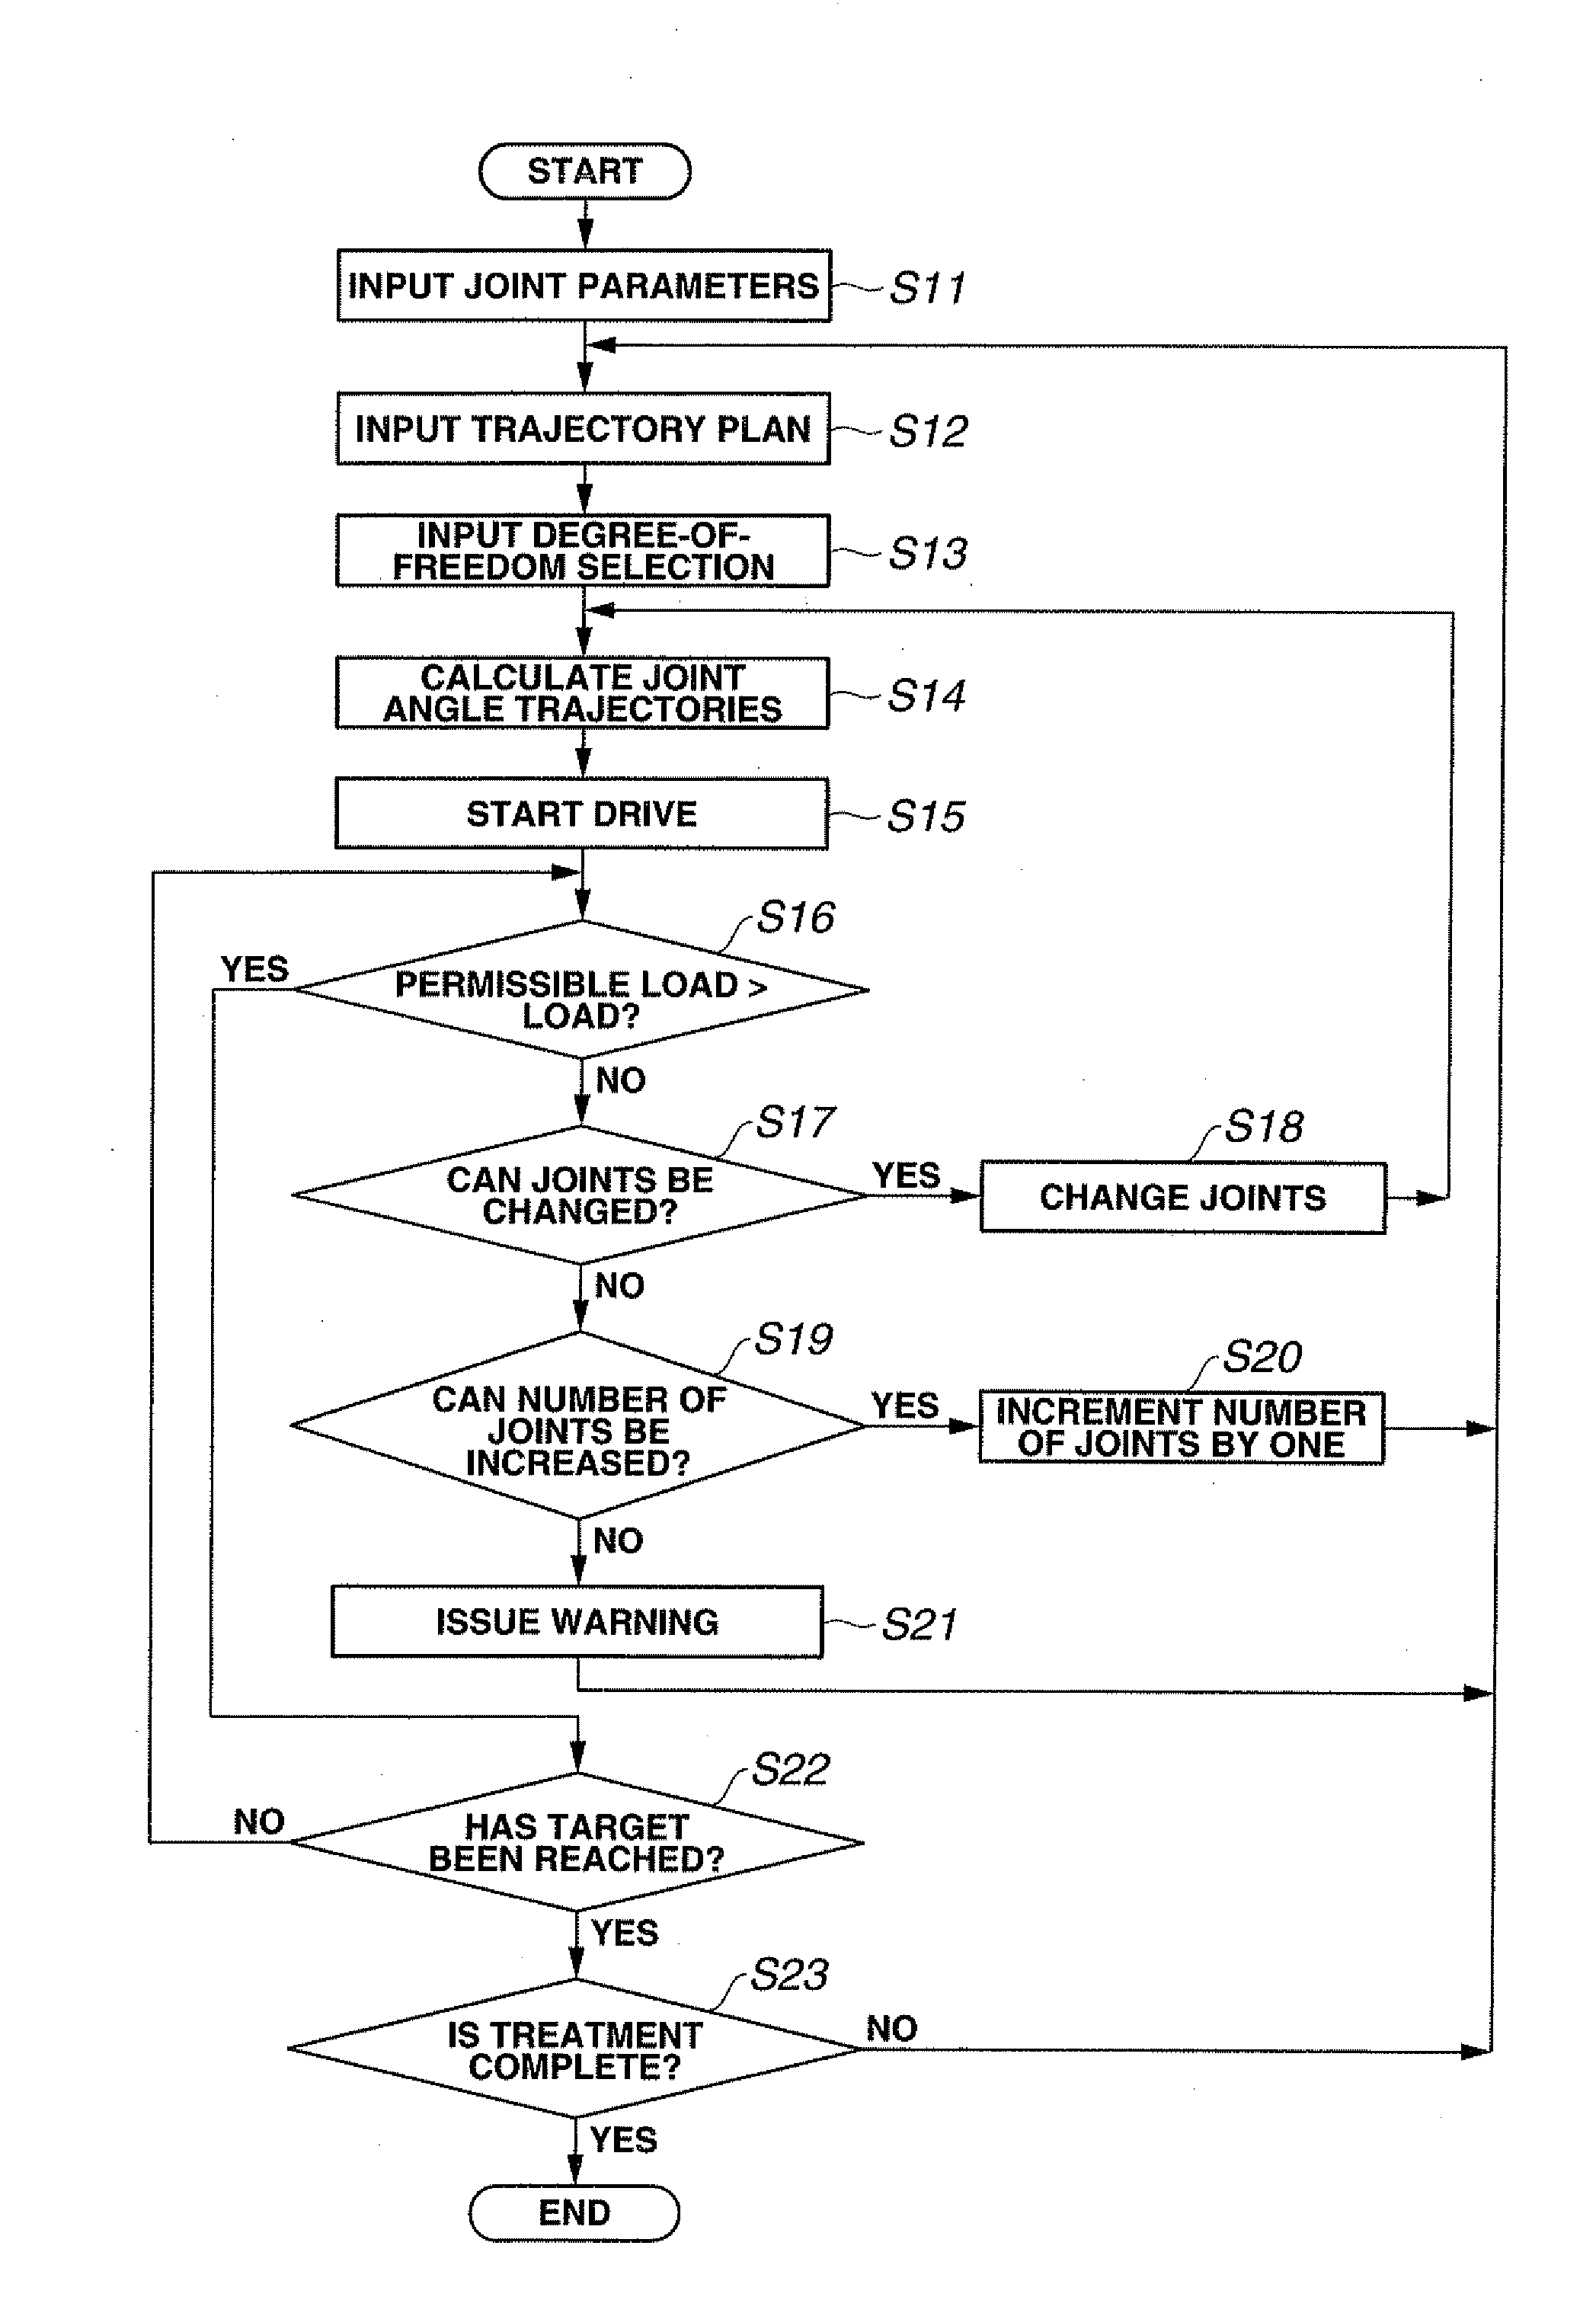 Manipulator apparatus and medical device system